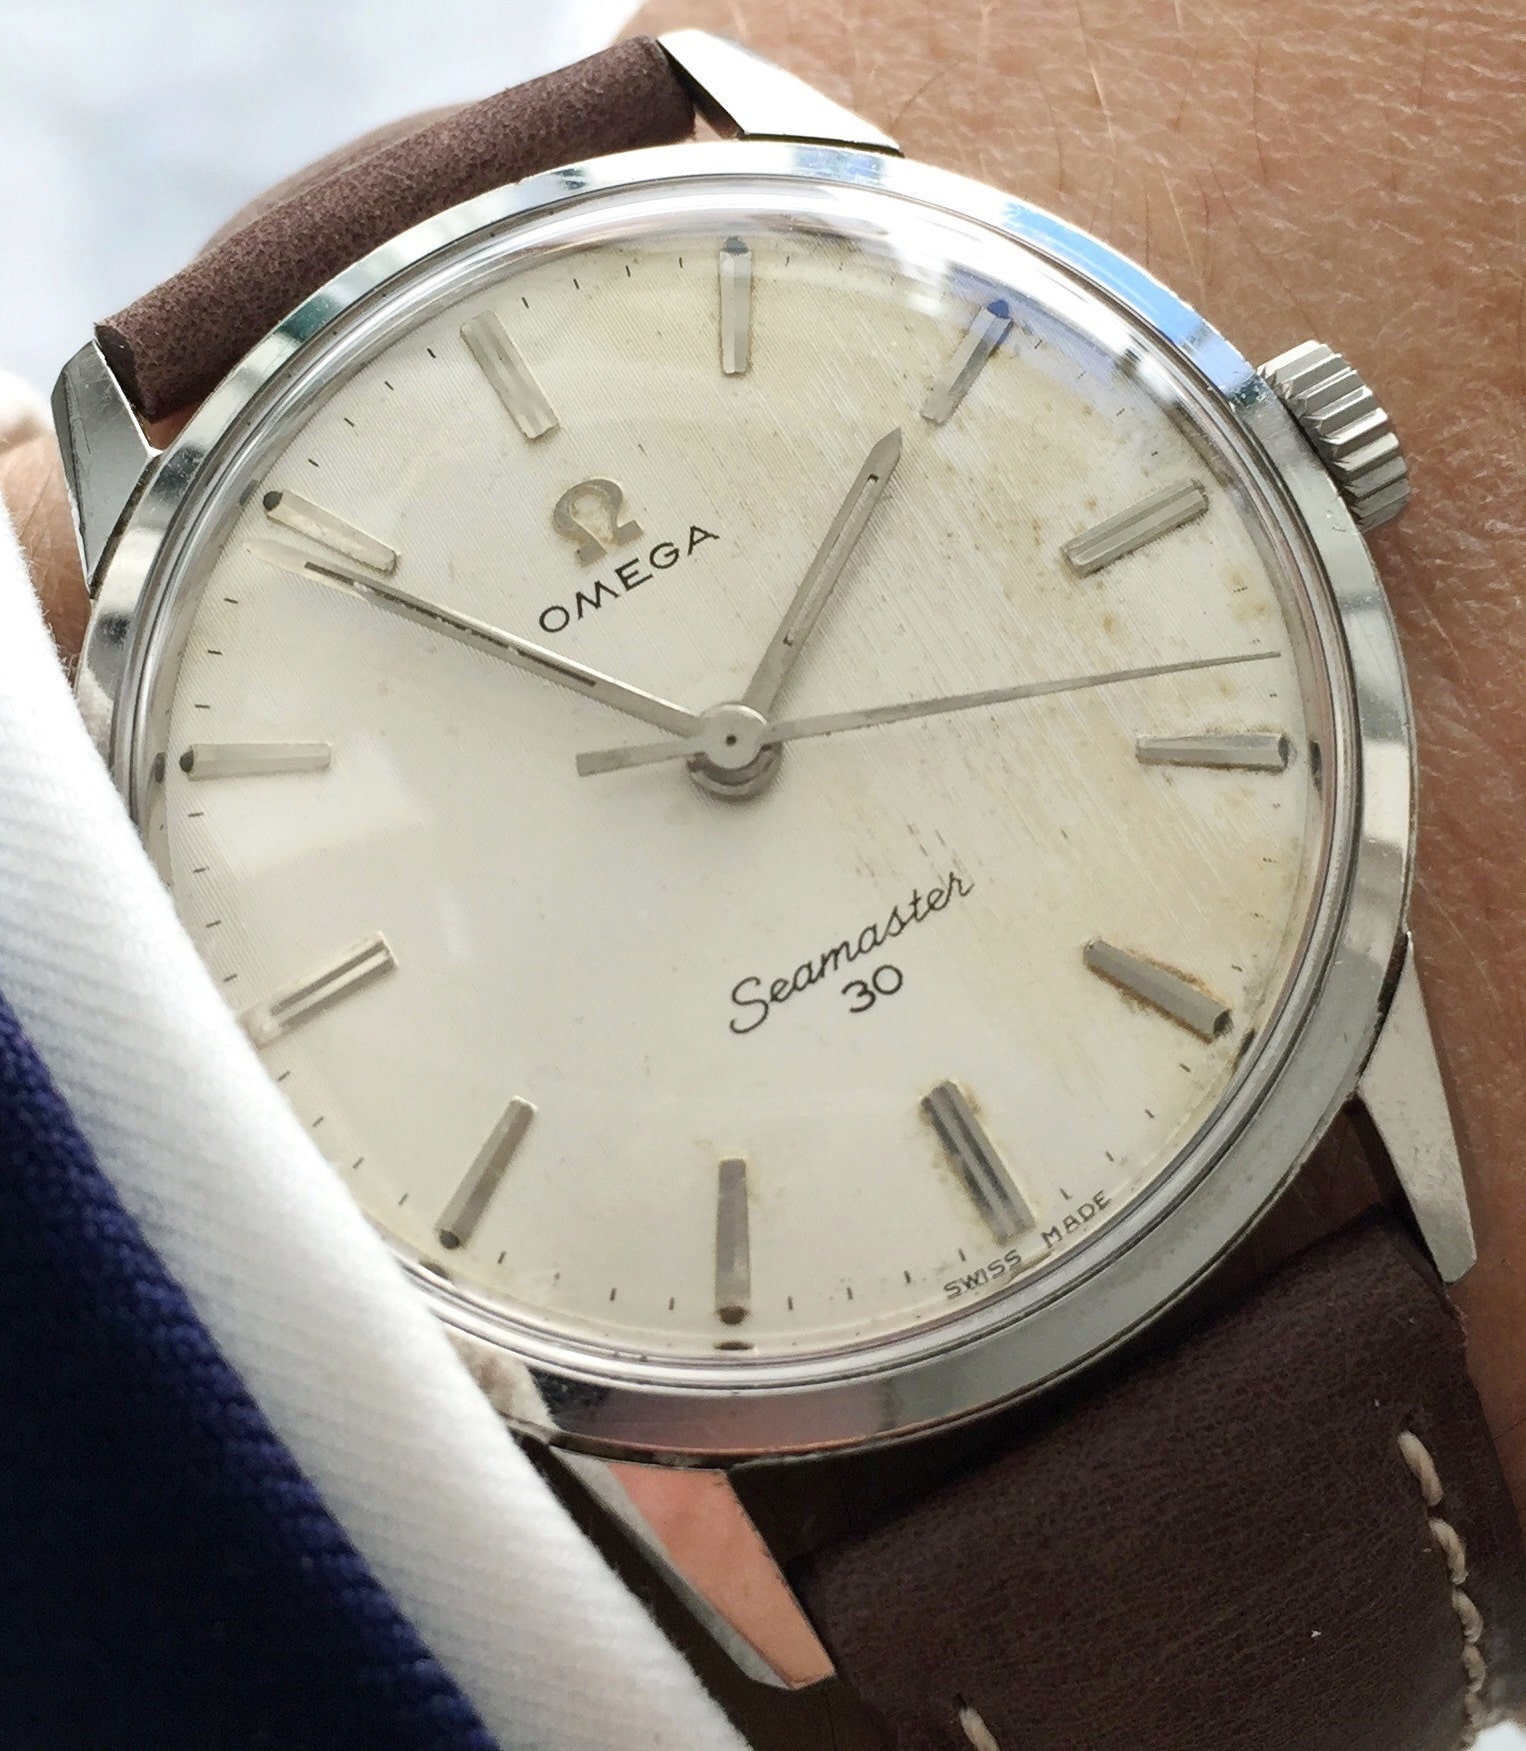 omega watches old